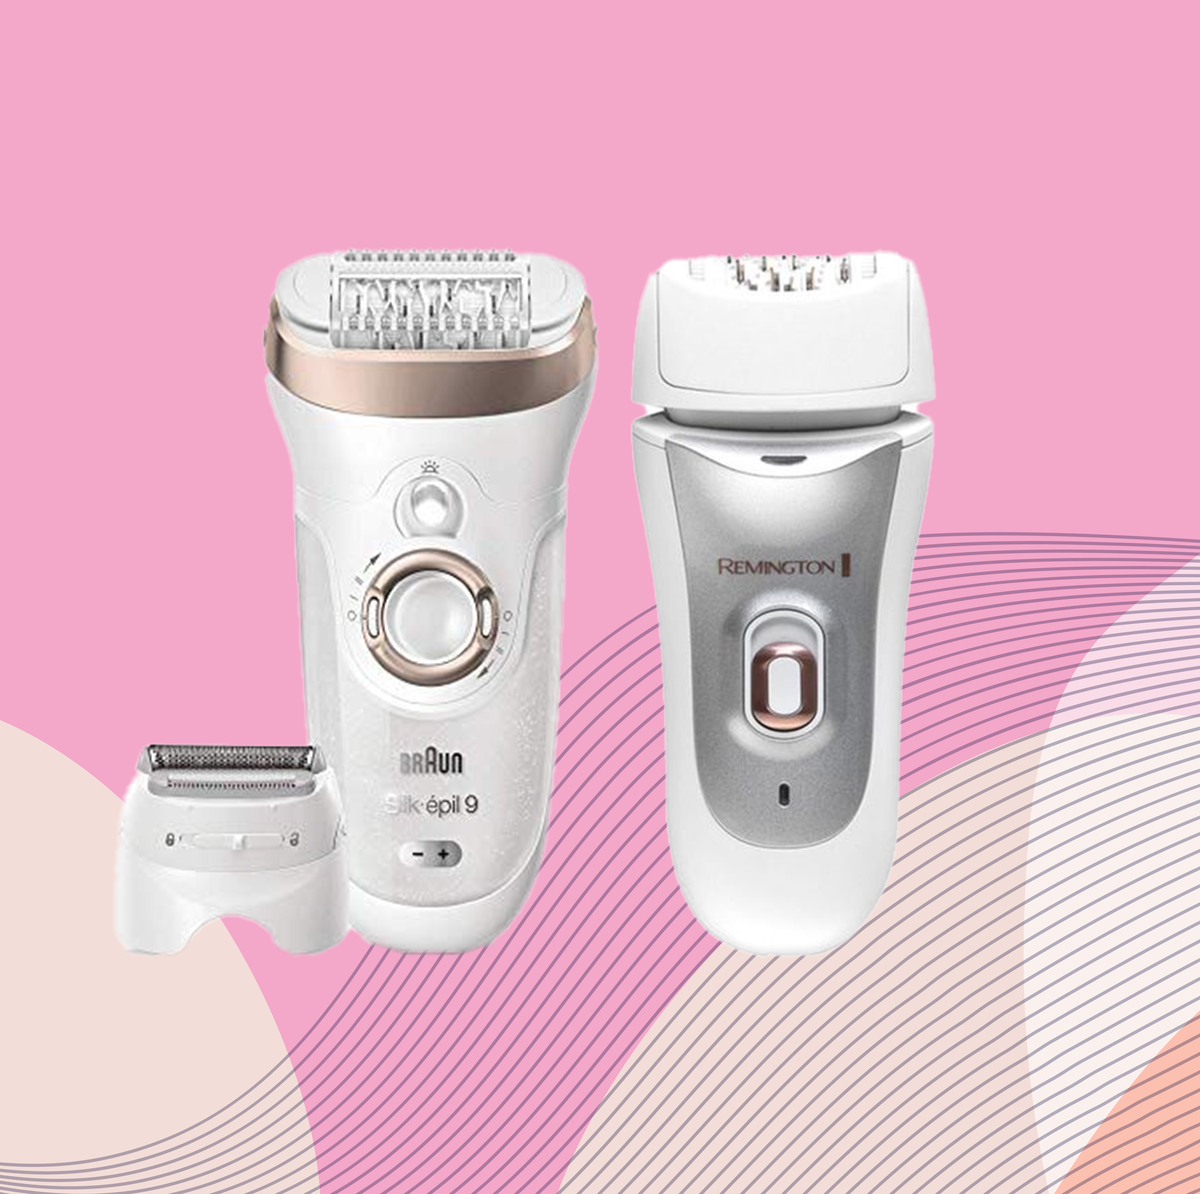 Silk-épil 5 Power 5280 Women's Epilator - Smooth and Easy Hair Removal